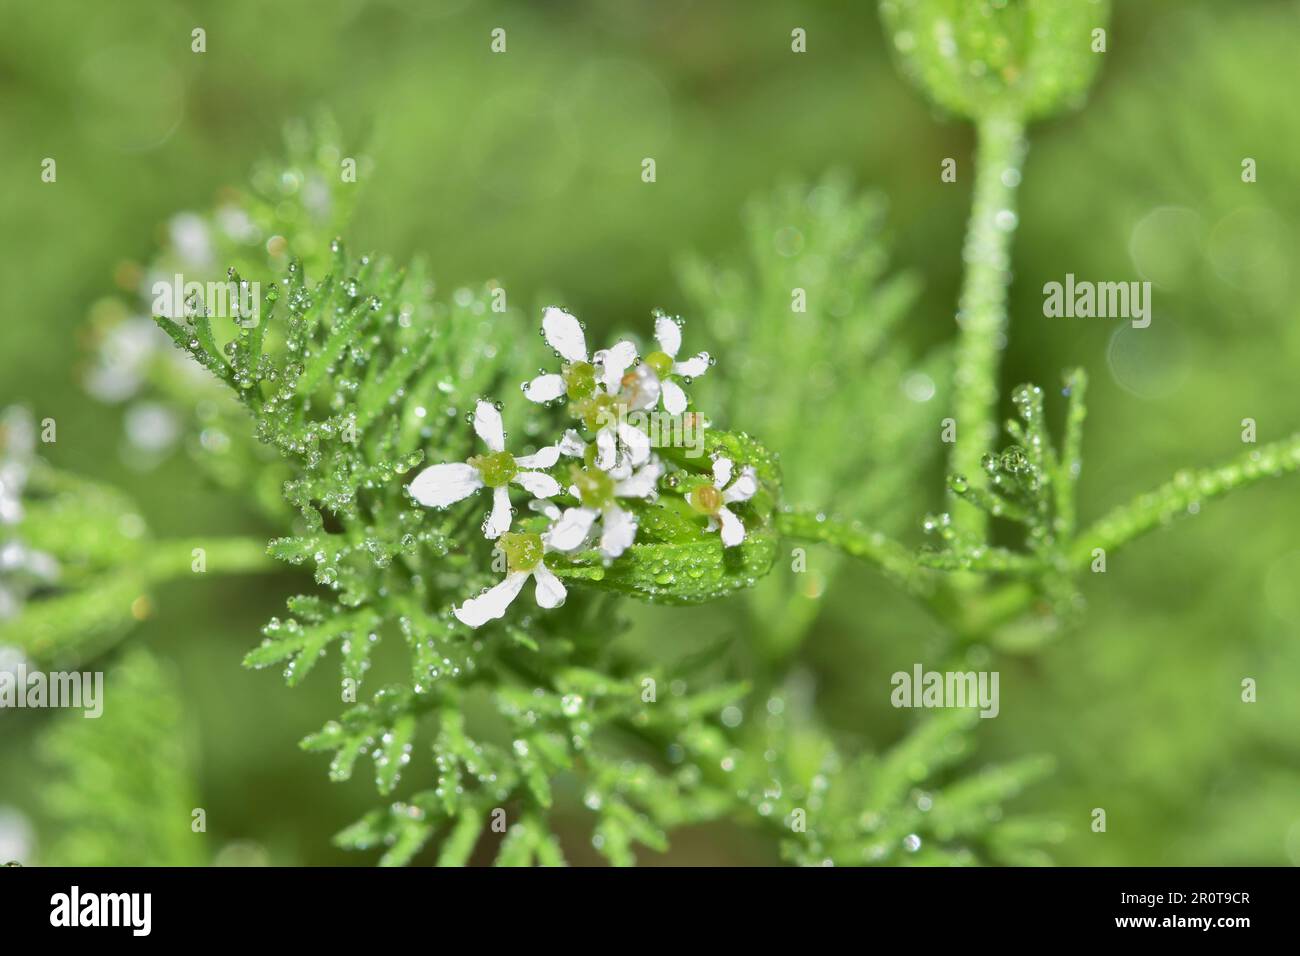 Shepherds Needle (Scandix pecten-veneris) plant flowers and leaves with water droplets. Invasive species native to Europe, but found globally. Stock Photo